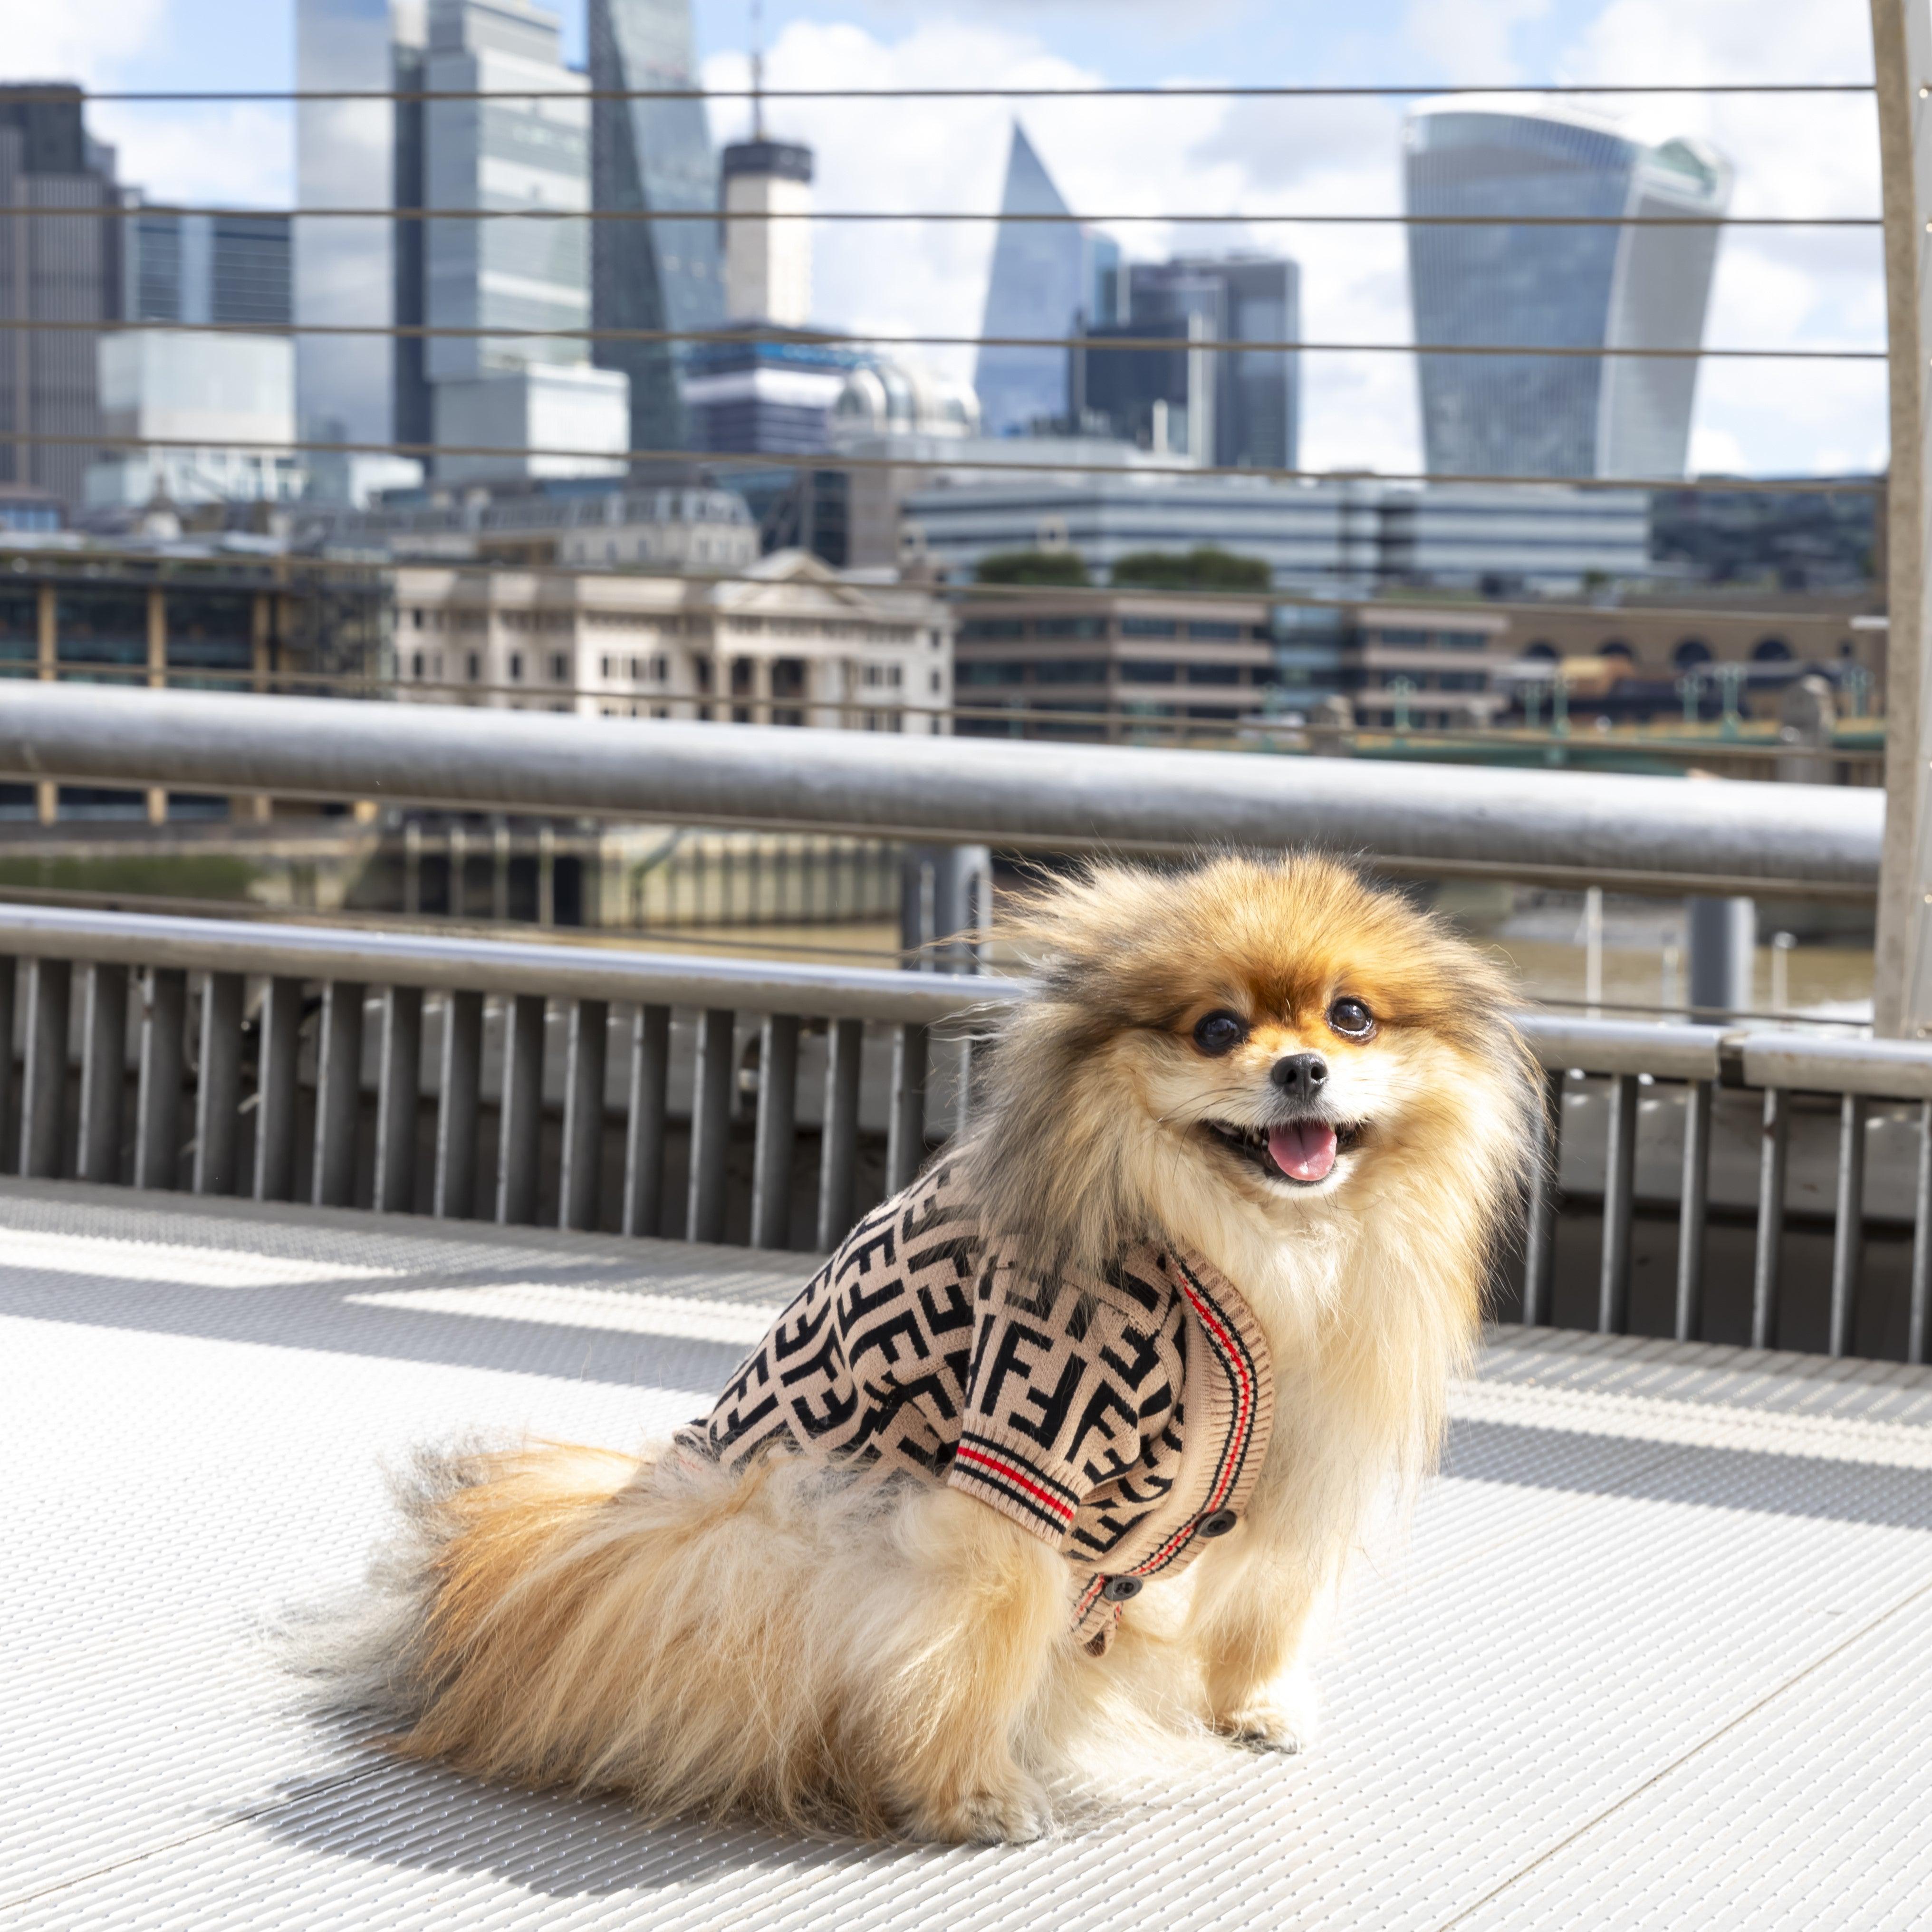 Shop Designer Clothes For Dogs And Dog Walking Accessories